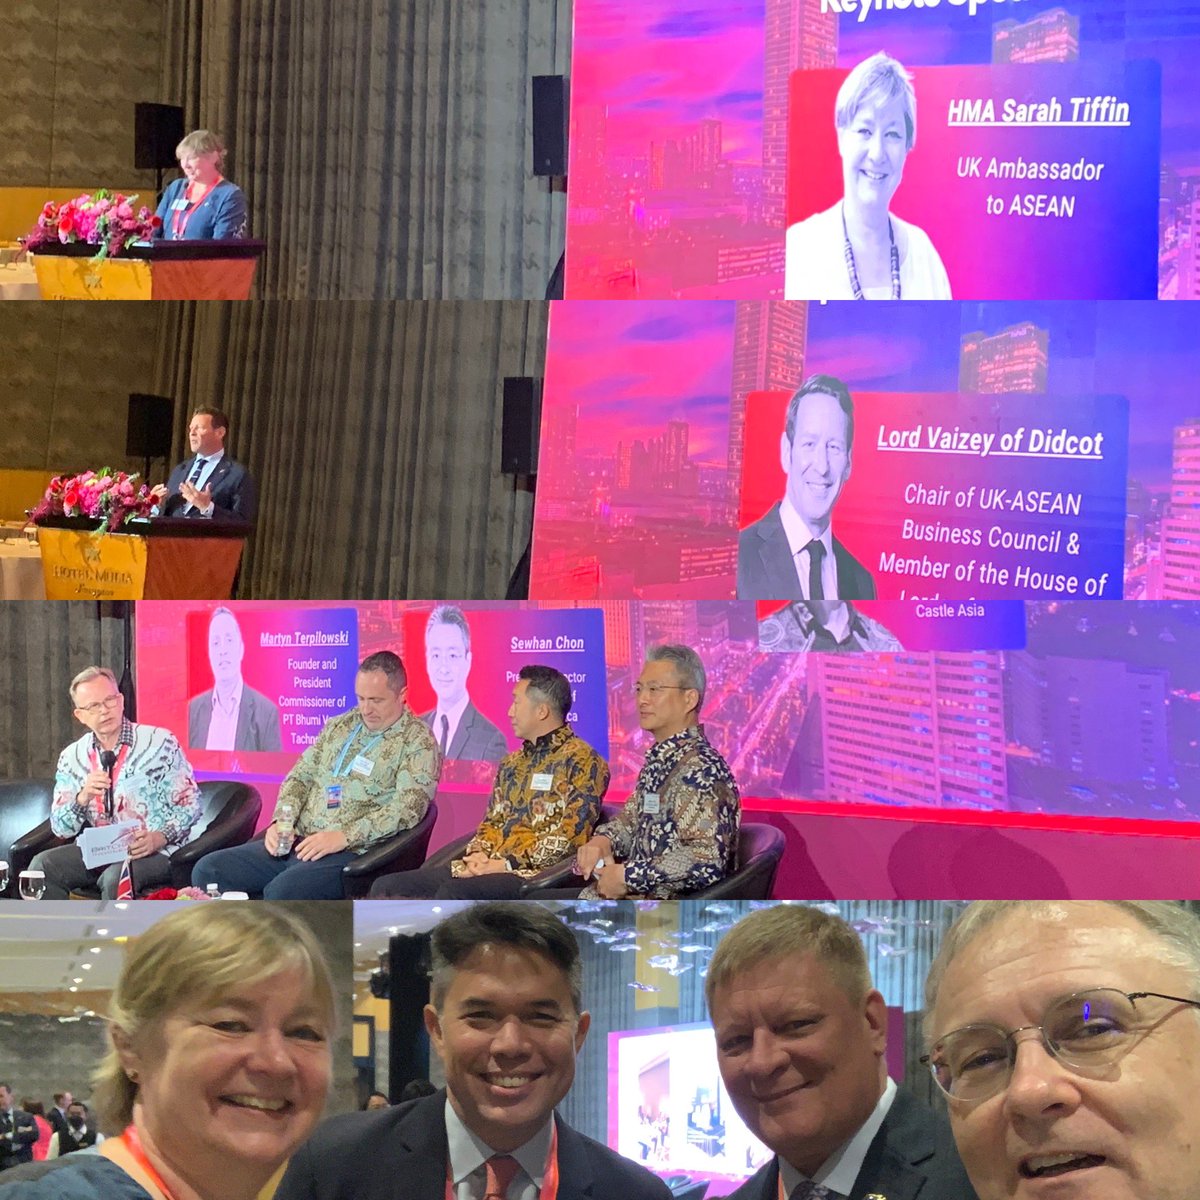 Full house for the The BritCham ASEAN Indo-Pacific Business Forum 'Cutting Edge Business Intelligence for Global Leaders' in Jakarta. Nicely set up by opening remarks from UK Ambassador to ASEAN @SarahTiffinUK and @UKASEAN Chair @edvaizey before 1st discussion, ‘the Batik panel’!